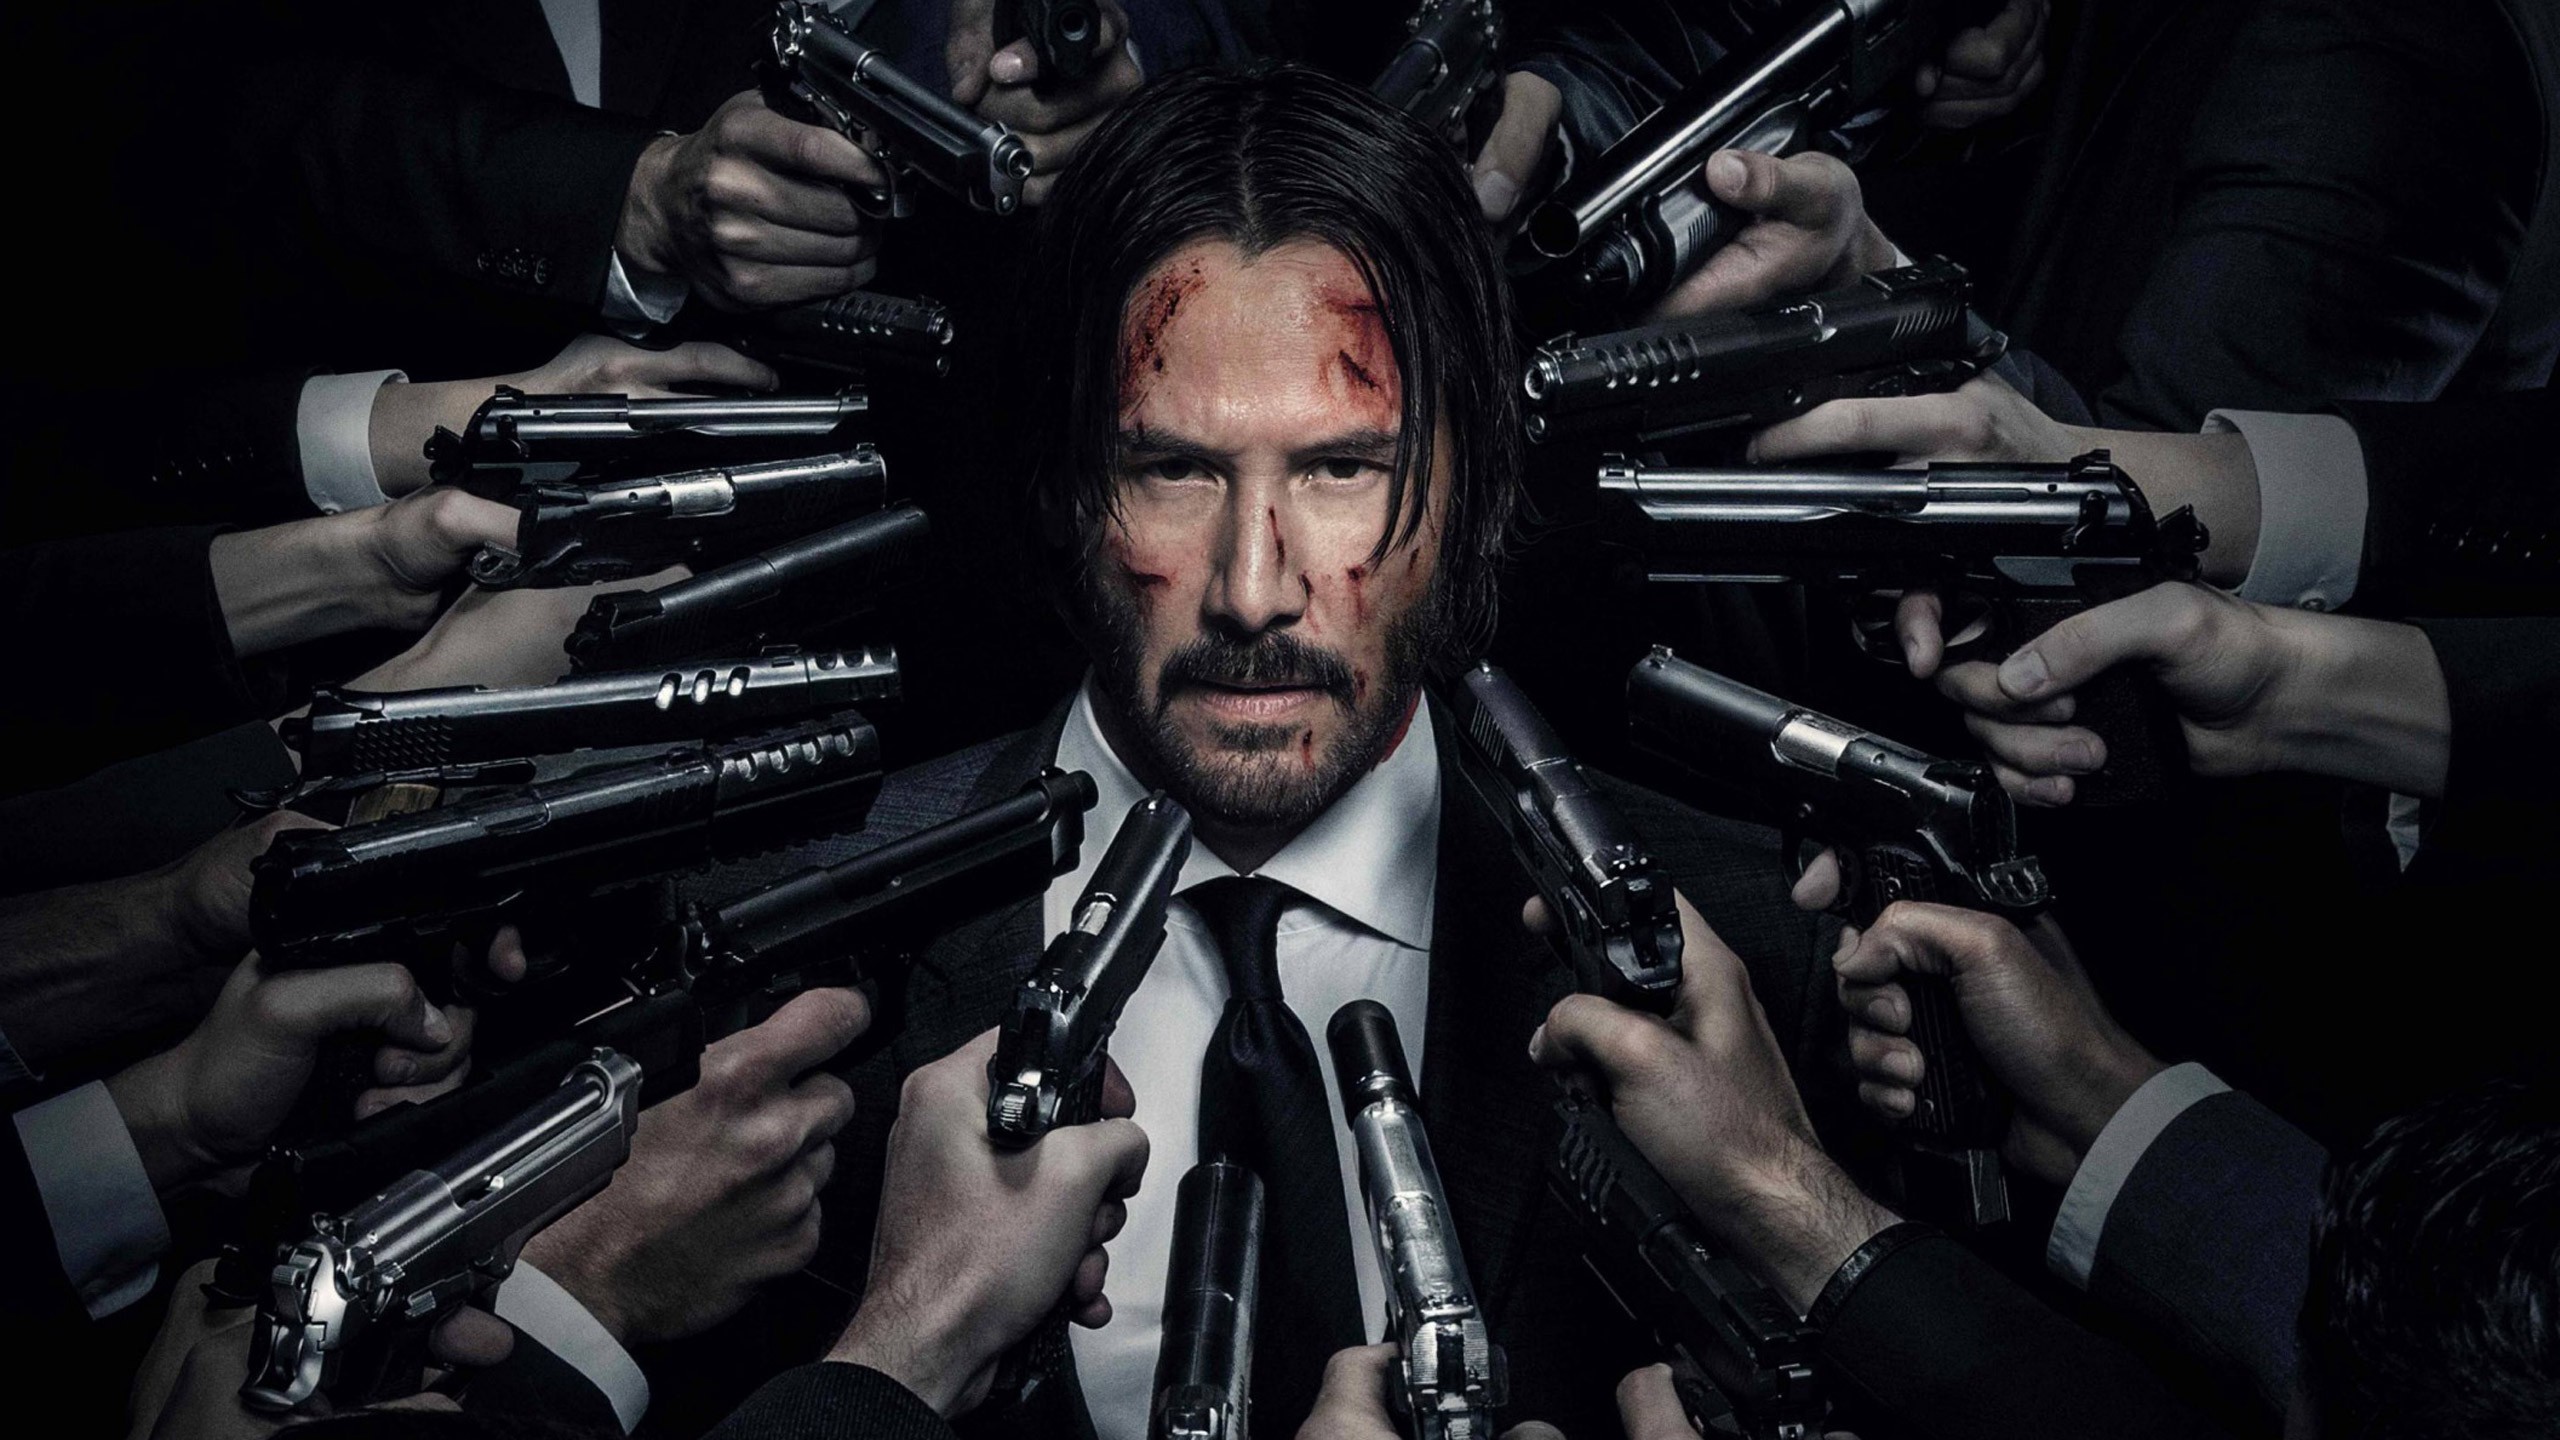 How to watch and stream John Wick: Chapter 2 - 2017 on Roku